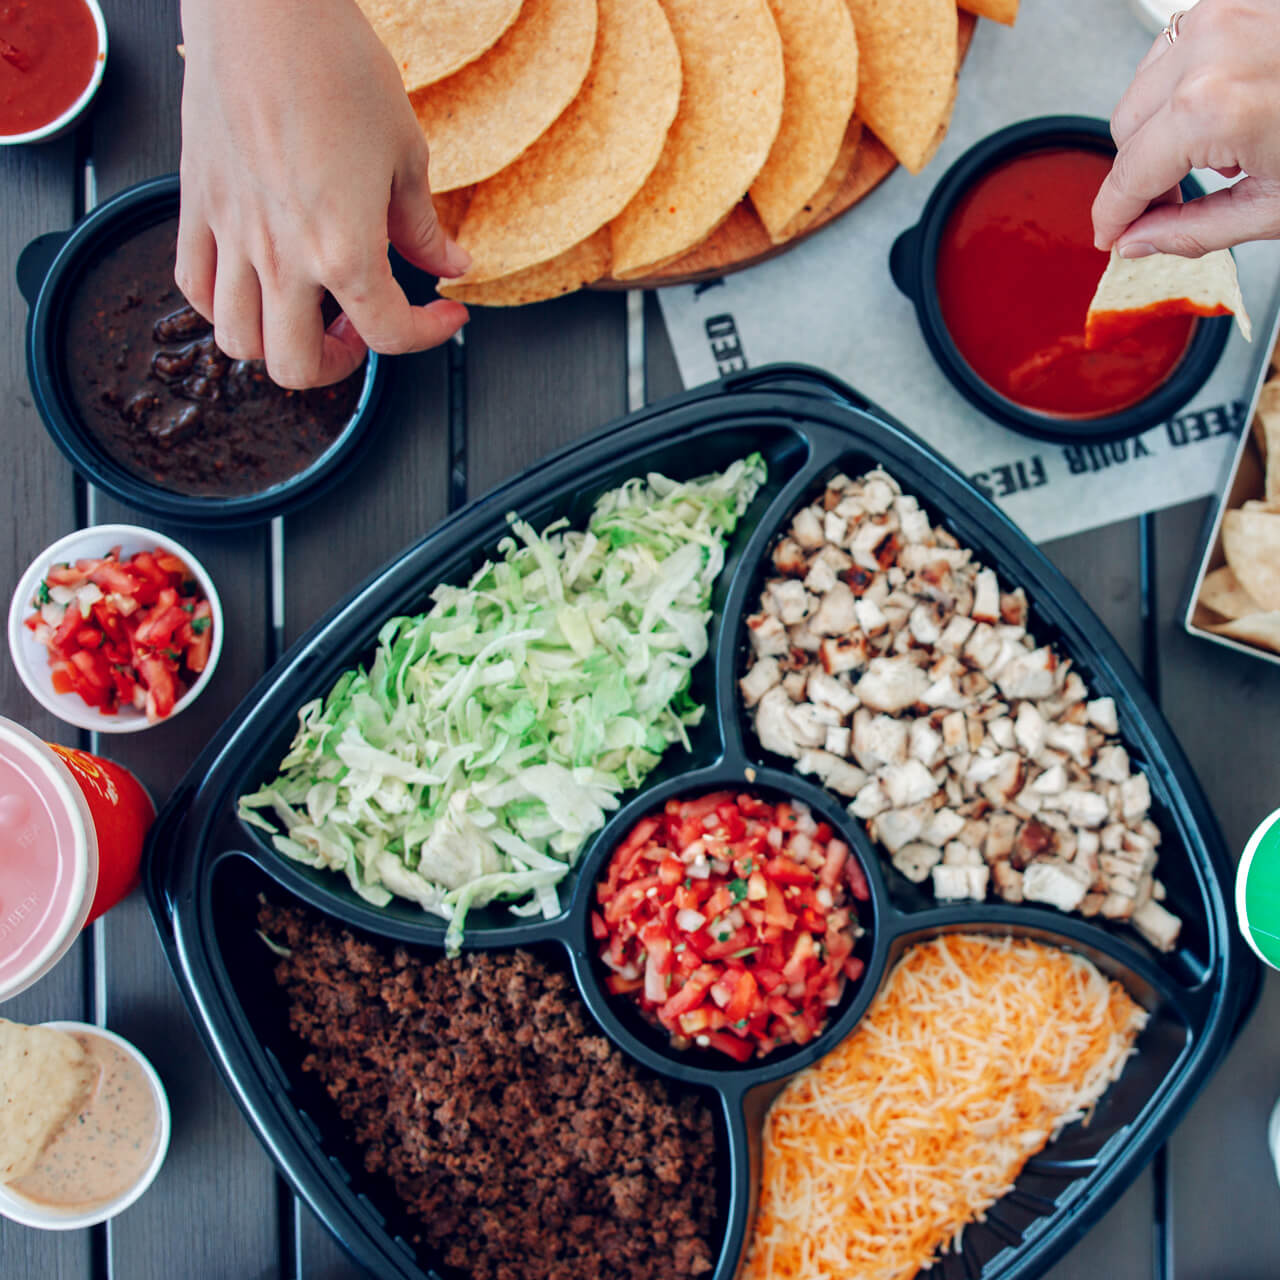 People dipping chips into salsa at a catered event